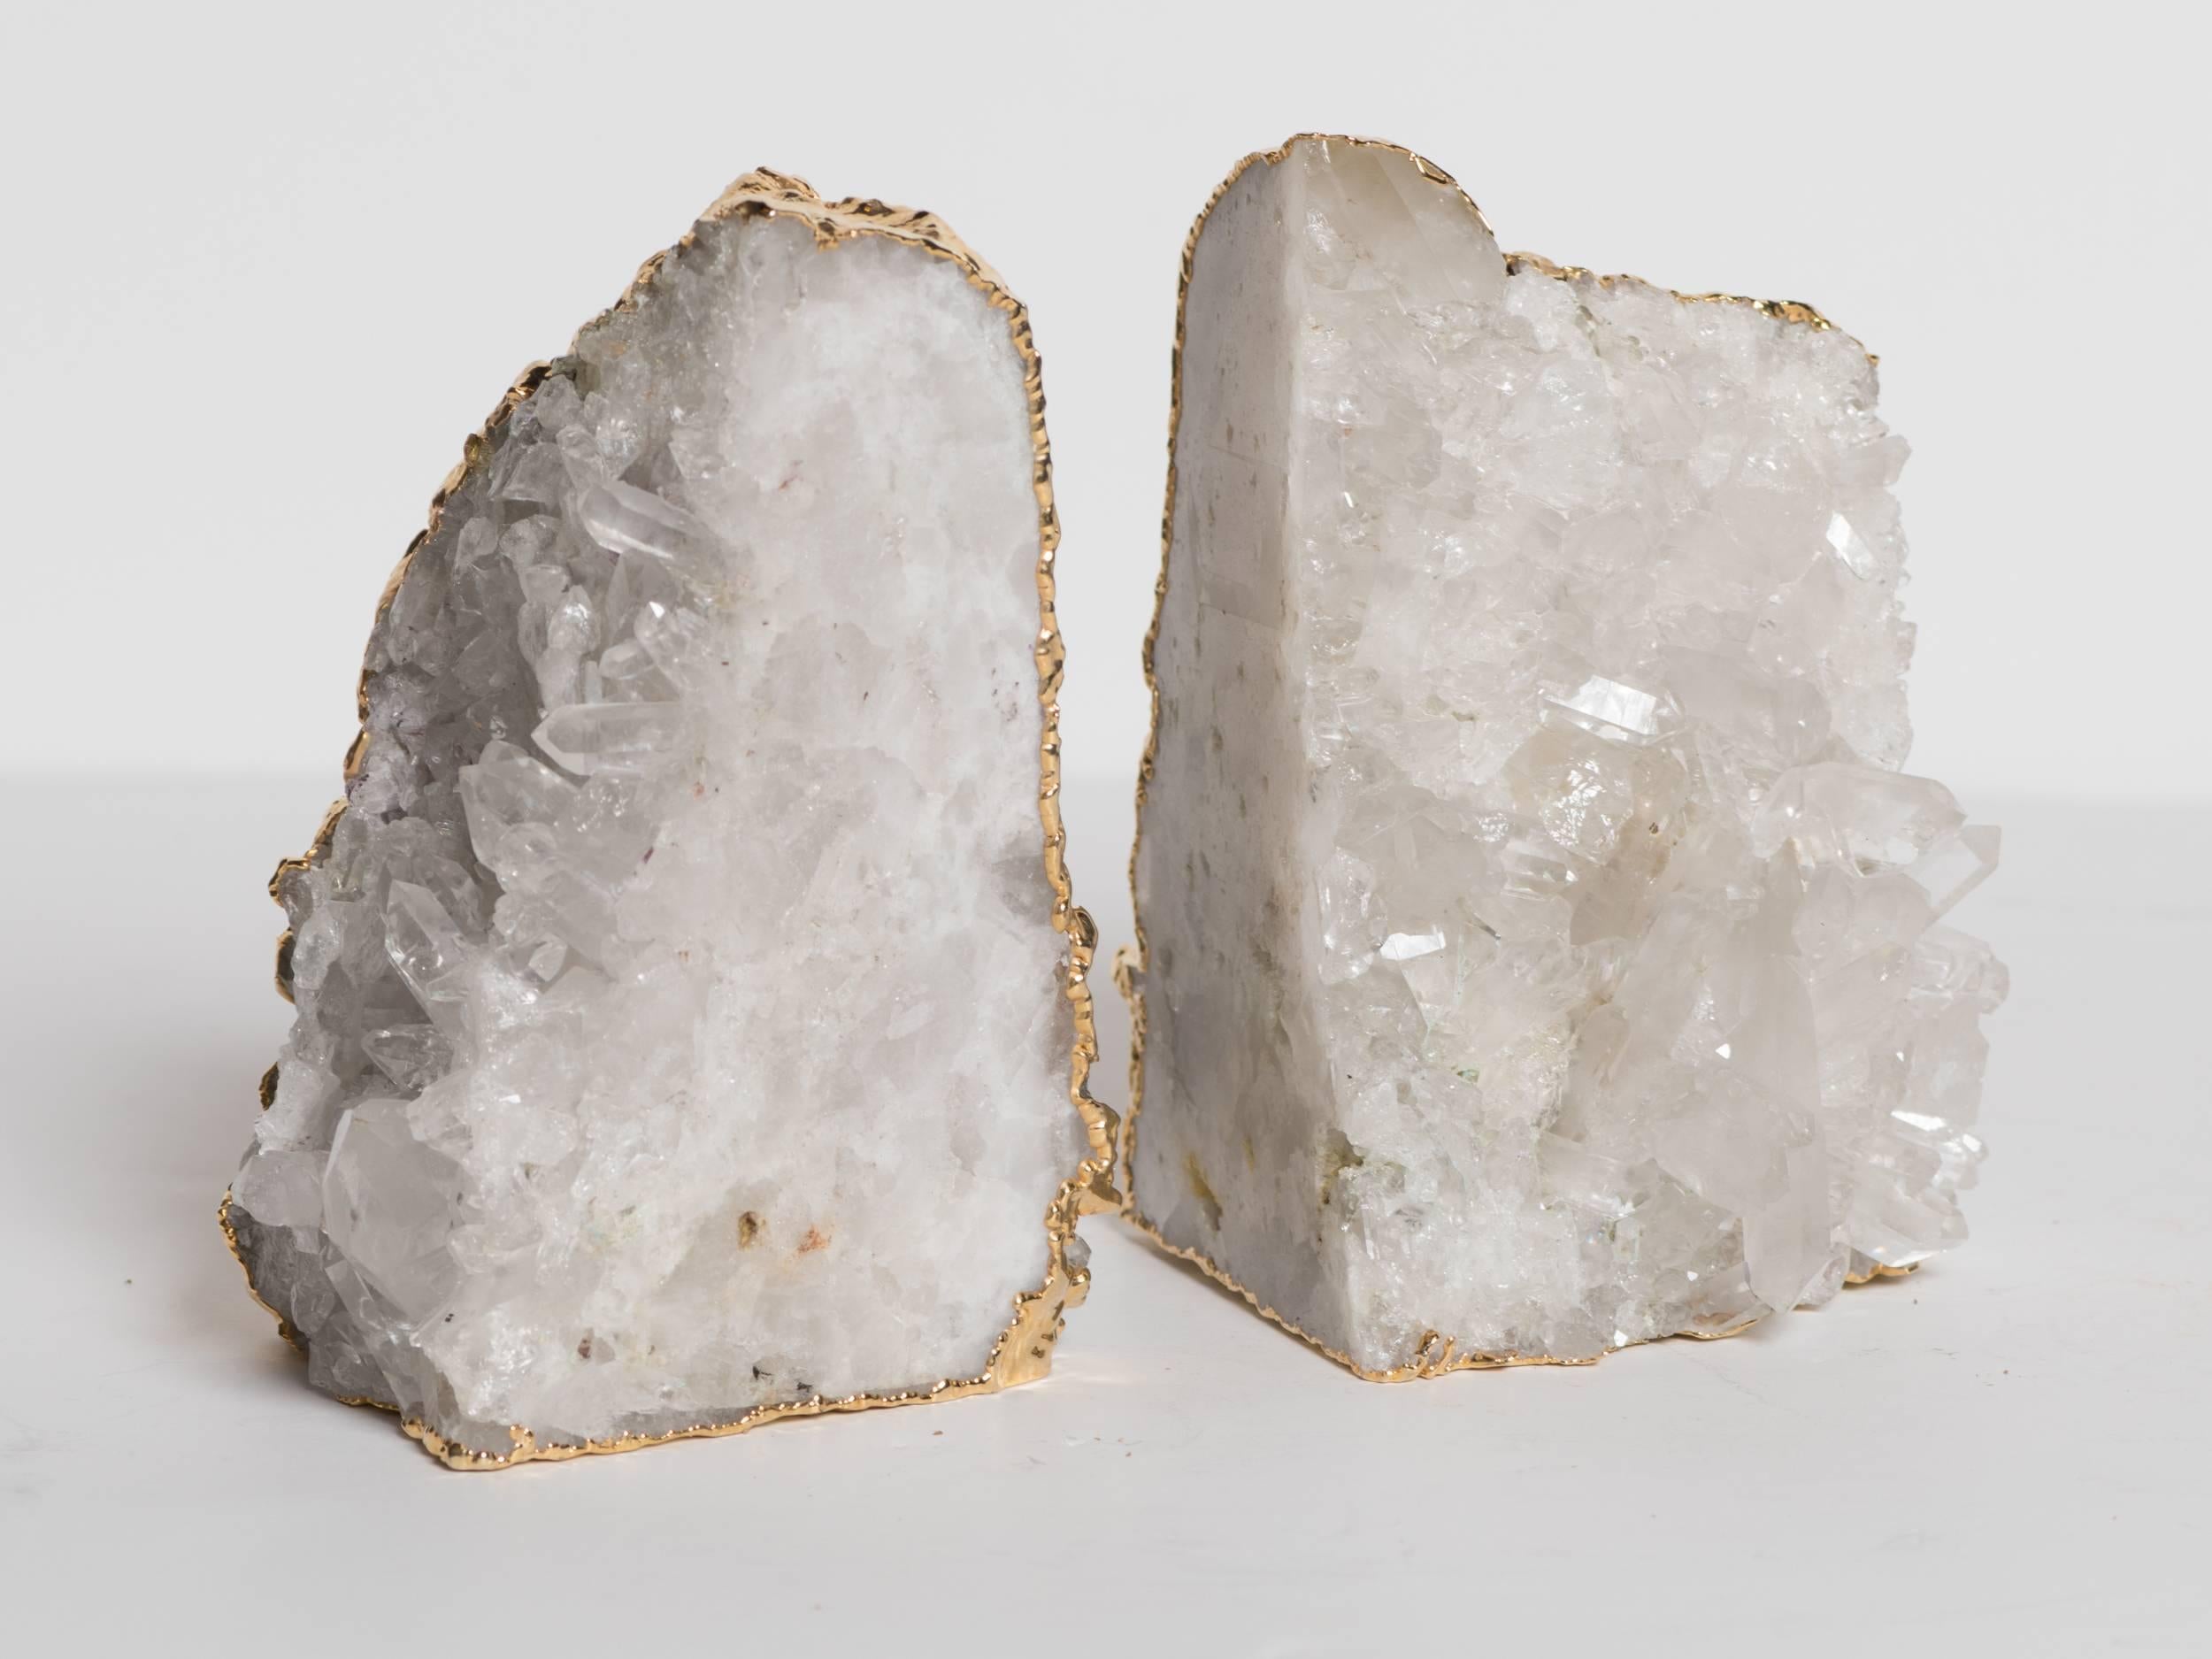 Outstanding pair of rock crystal quartz specimens with rough edges wrapped in 24-karat gold plating. Can be used as bookends or as decorative objects. Exquisite natural forms with protruding wedges of quartz throughout. Stunning from all angles and